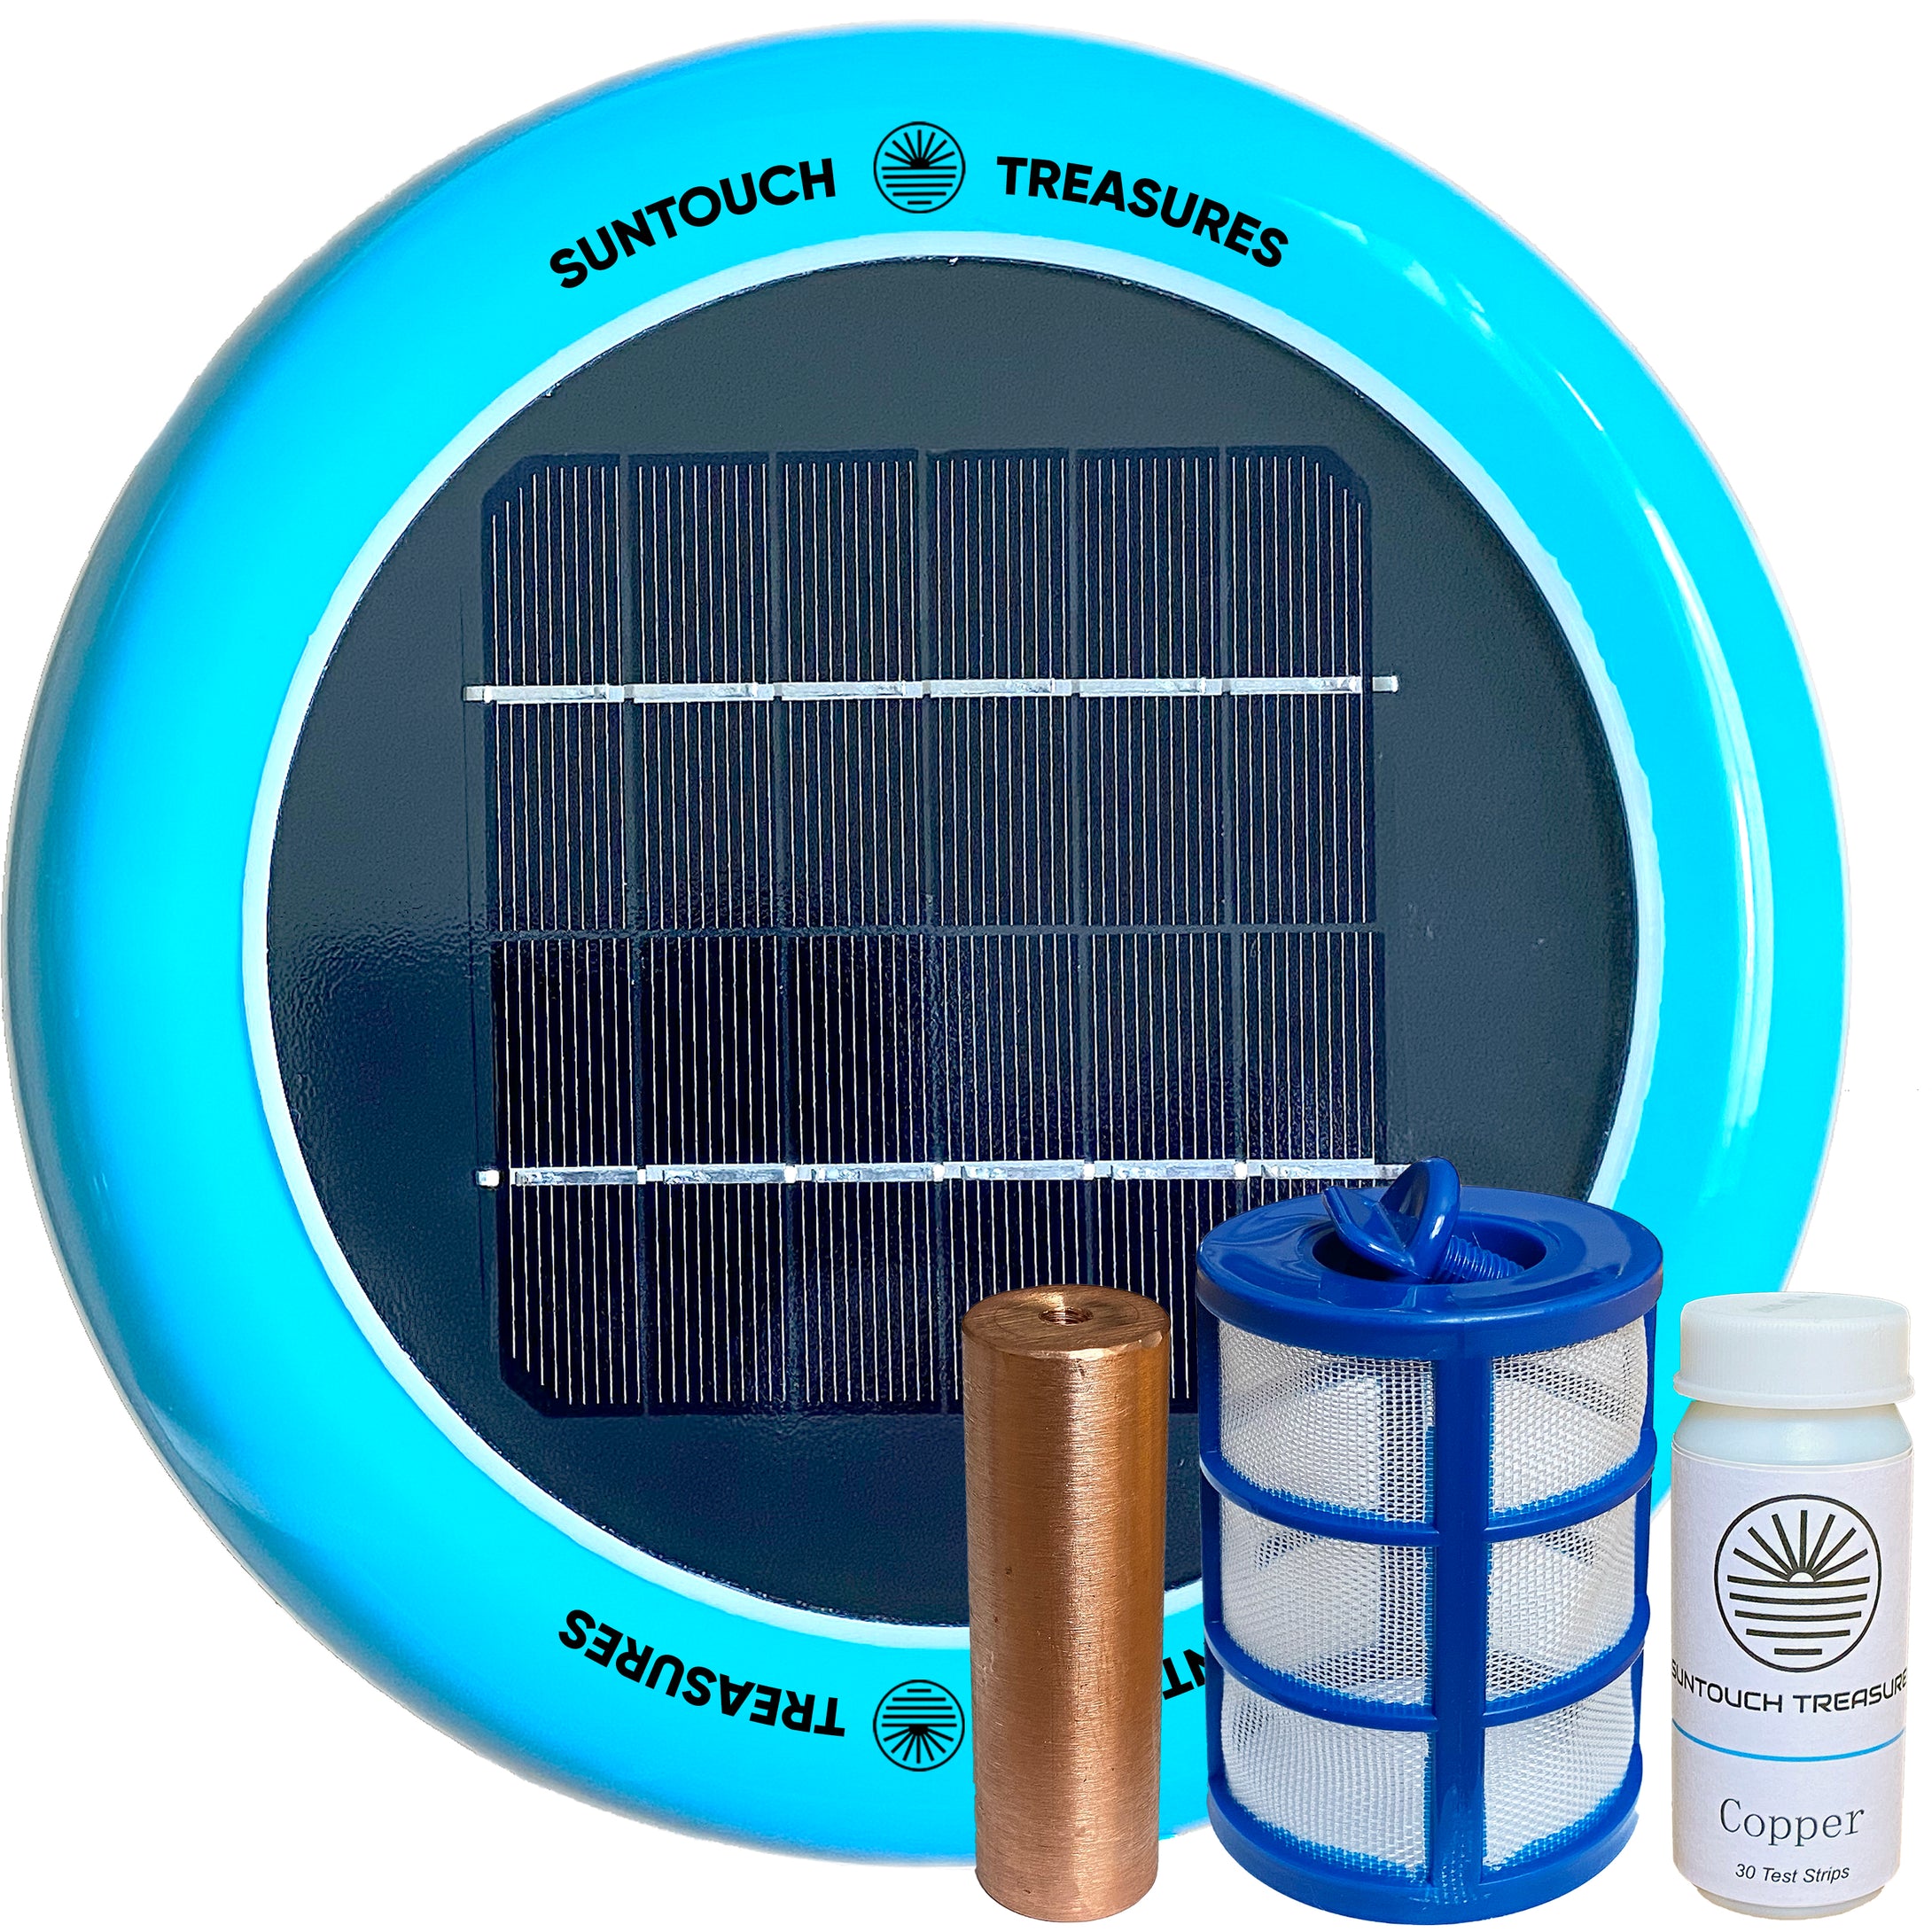 SUNTOUCH TREASURES SOLAR POOL MAID IONIZER - NEW DESIGN UP TO 35,000 gallons